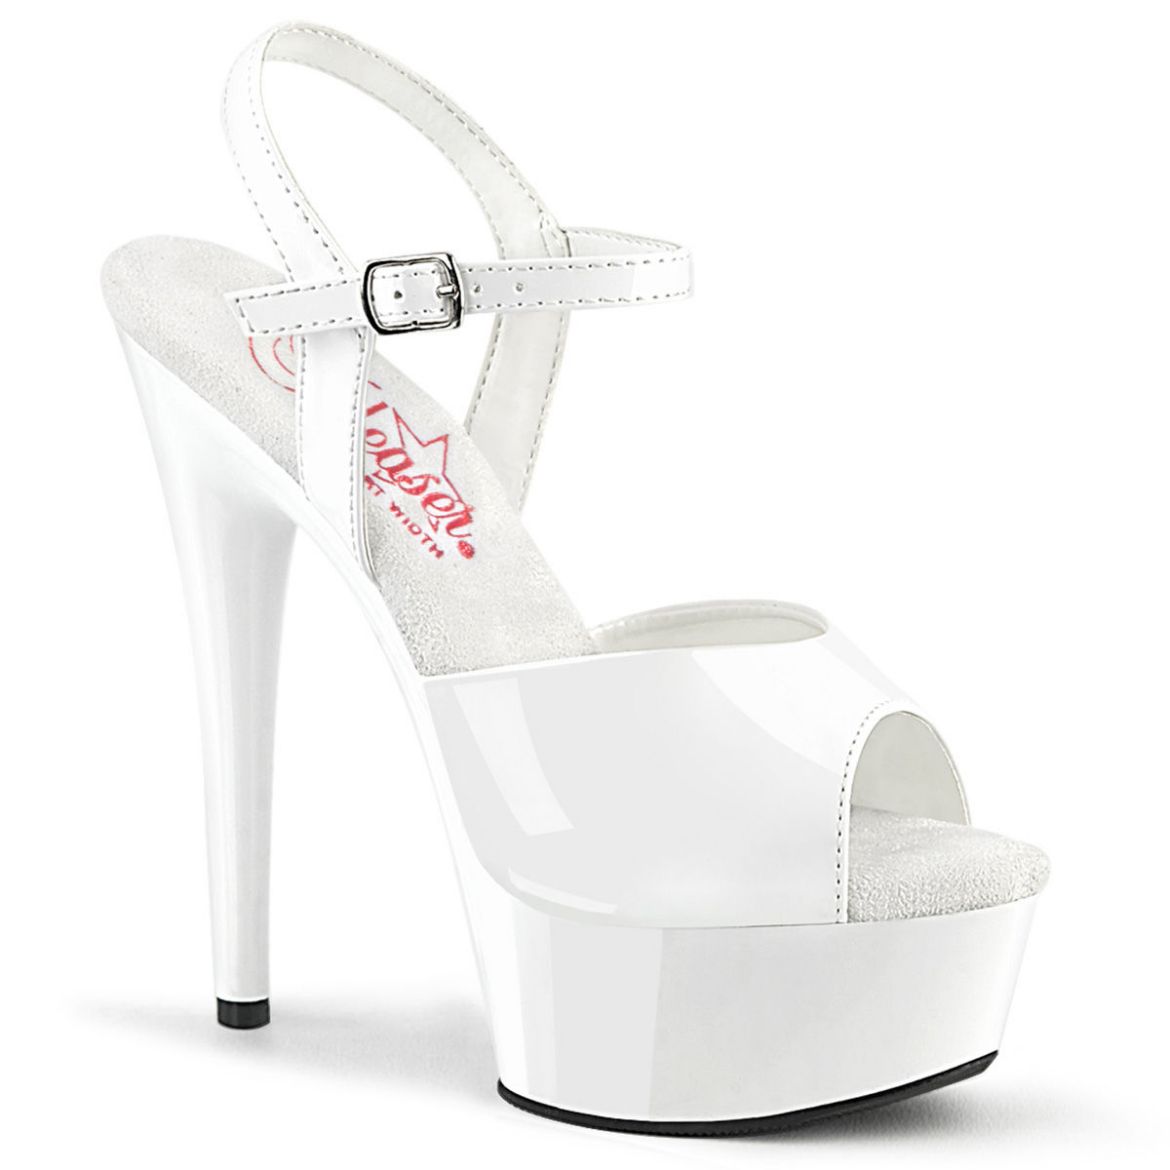 Image of Pleaser EXCITE-609 Wht Pat/Wht 6 Inch Heel 1 3/4 Inch PF Ankle Strap Sandal